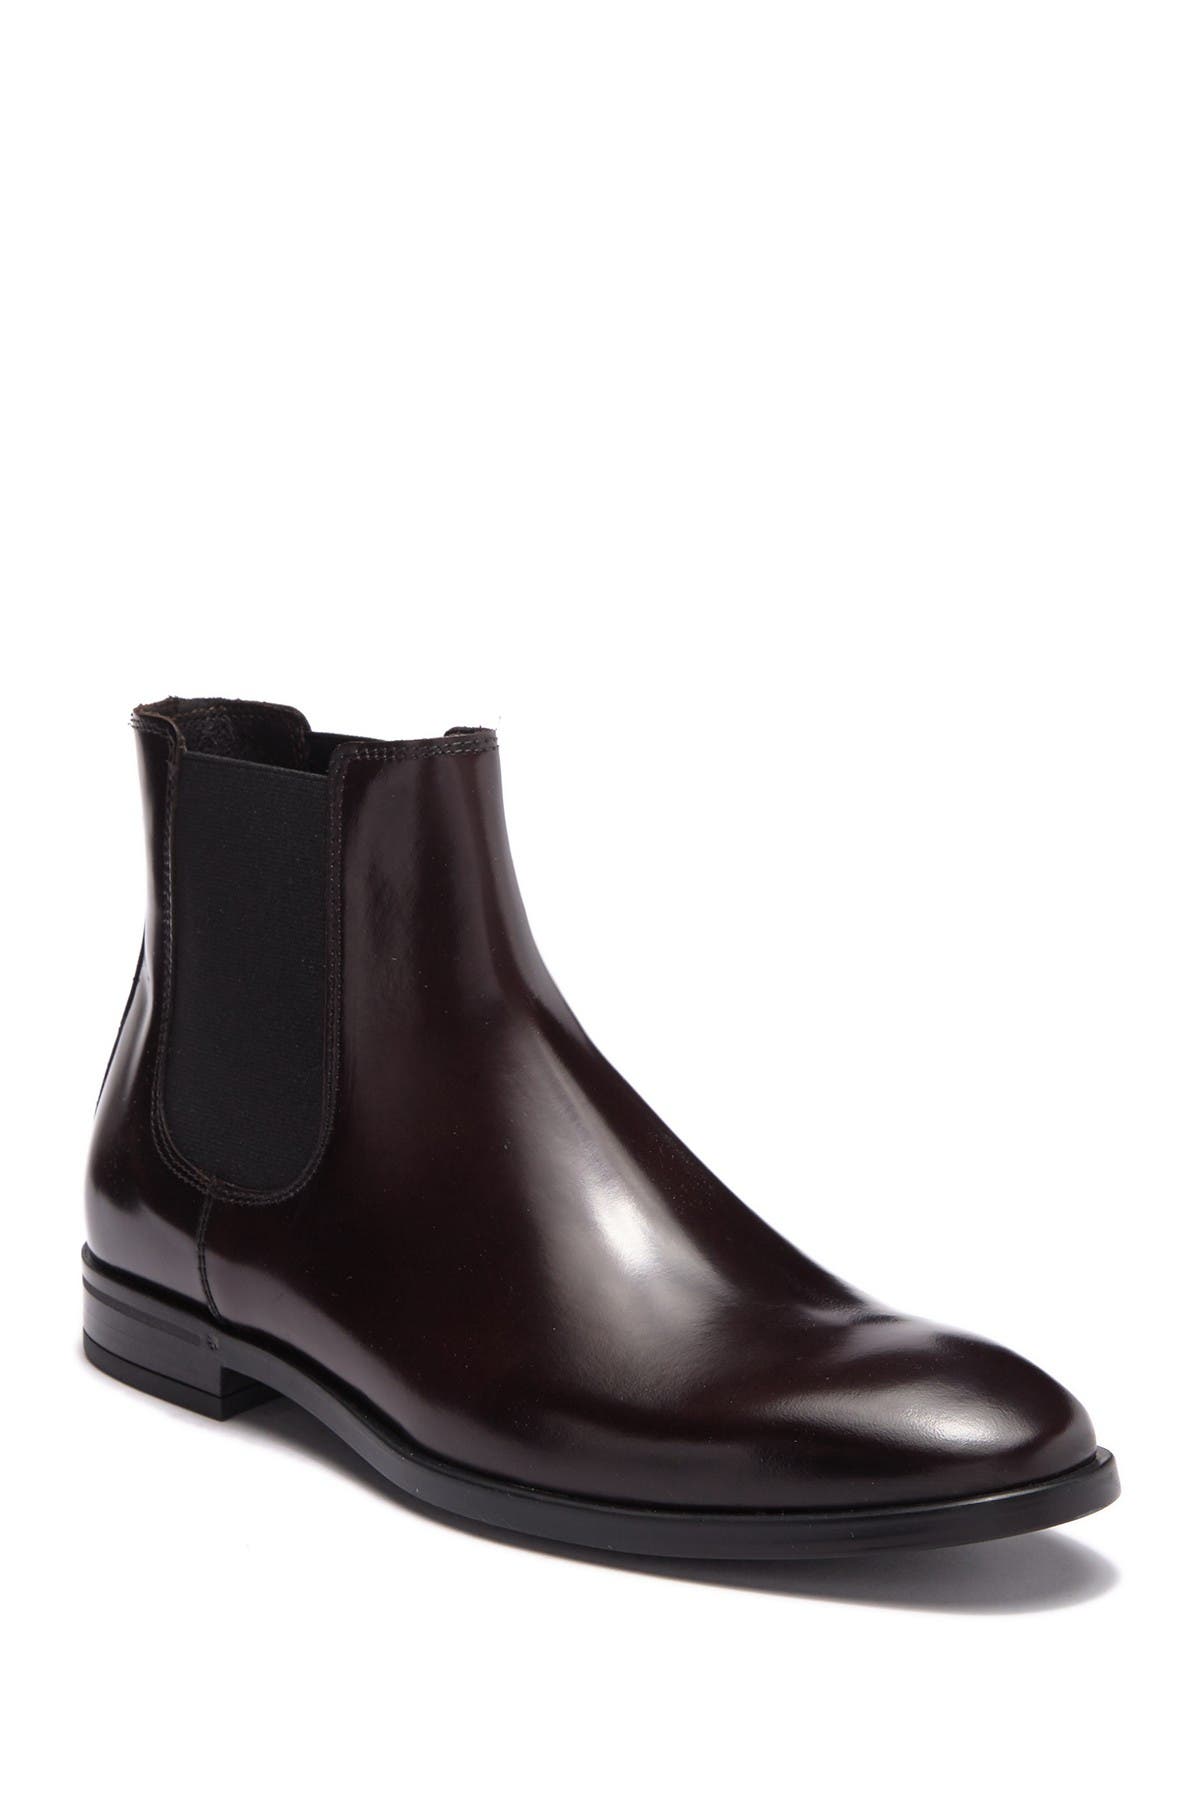 to boot new york brighton chelsea boots